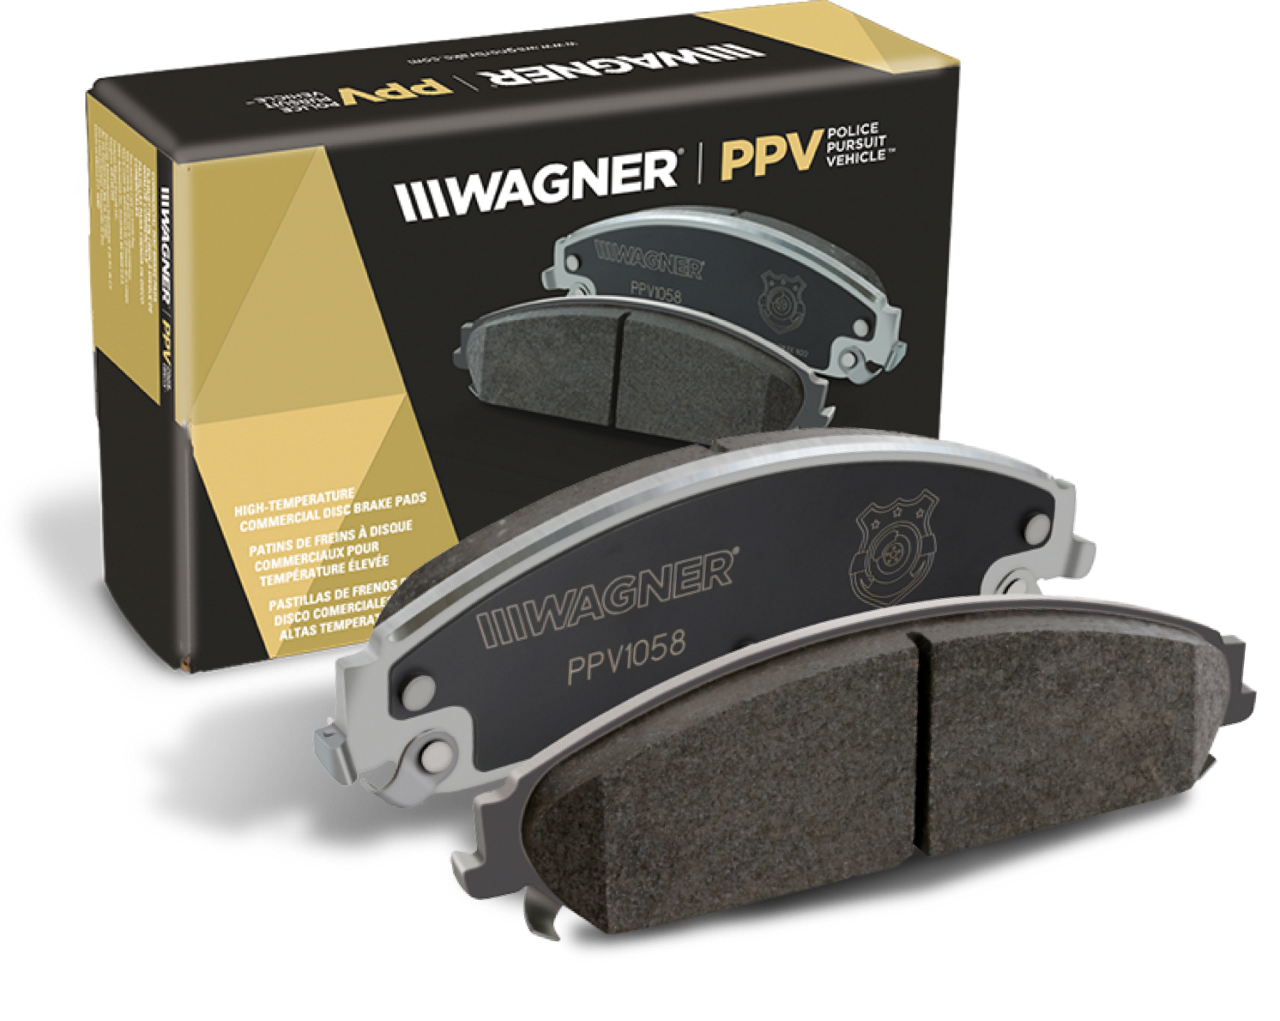 Two Wagner PPV brake pads in front of the box they came in